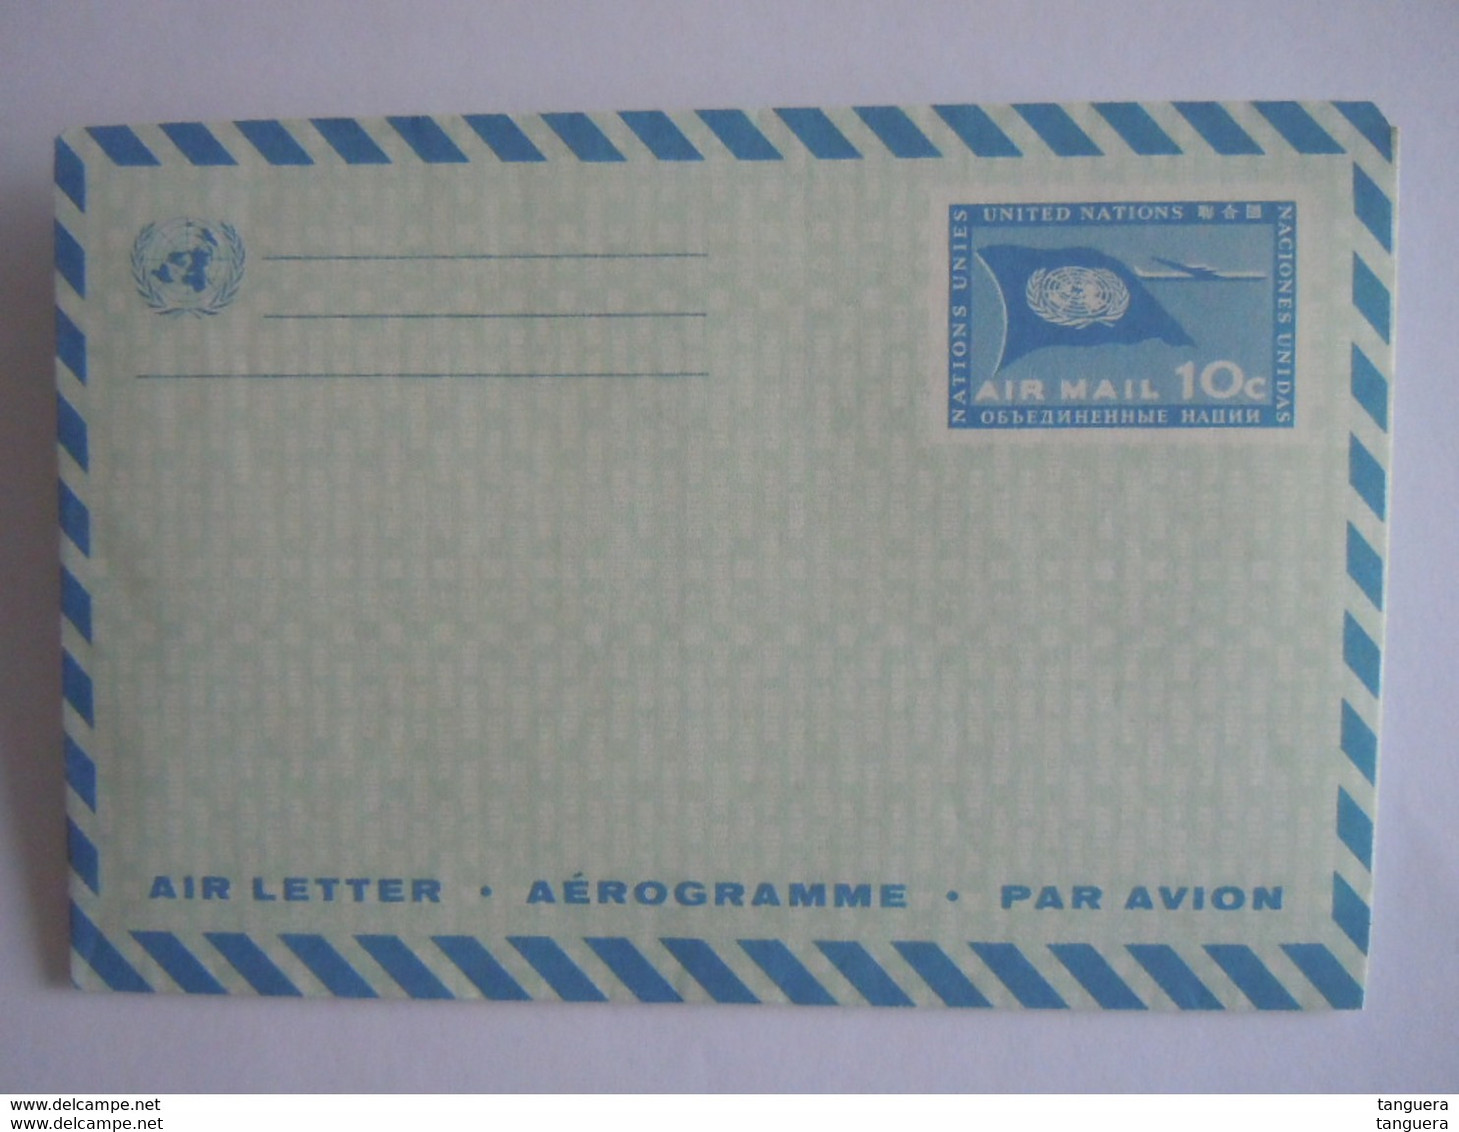 UN UNO United Nations New York Aerogramme Stationery Entier Postal Air Letter Flag 10c Mint - Luchtpost